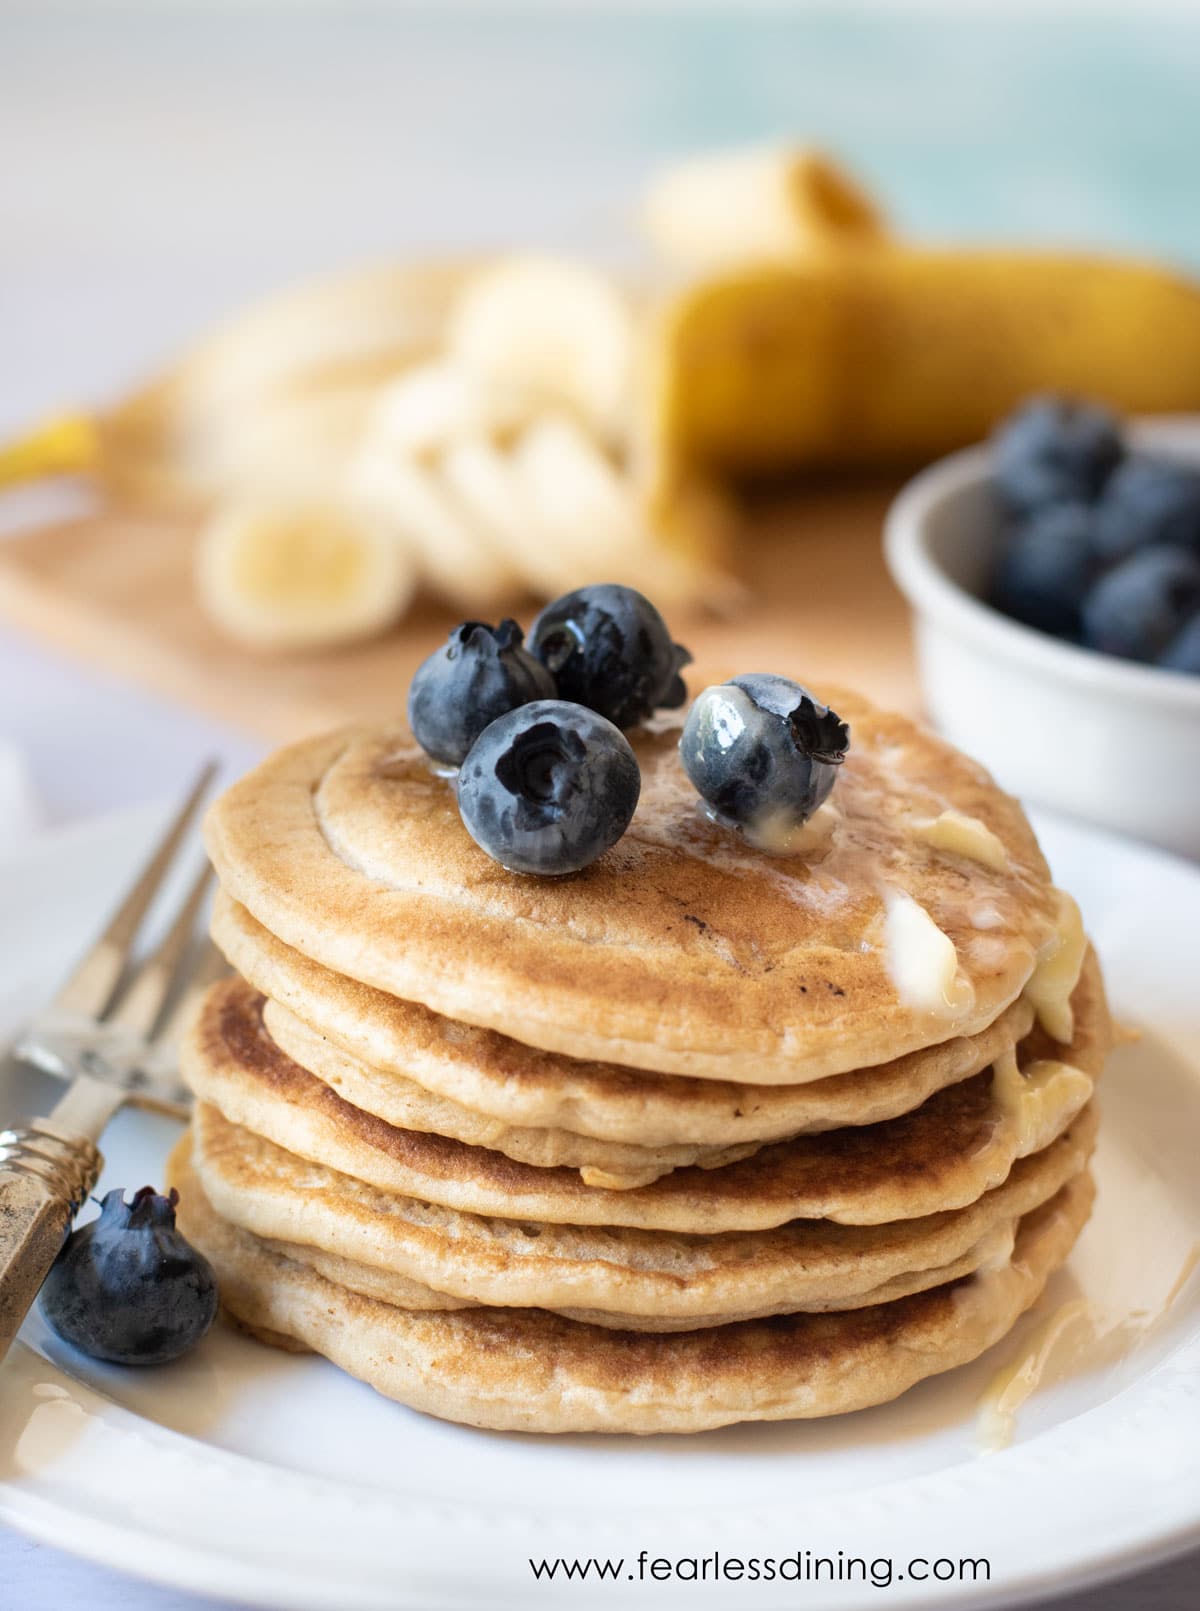 A stack of gluten free pancakes with blueberries and butter on top.